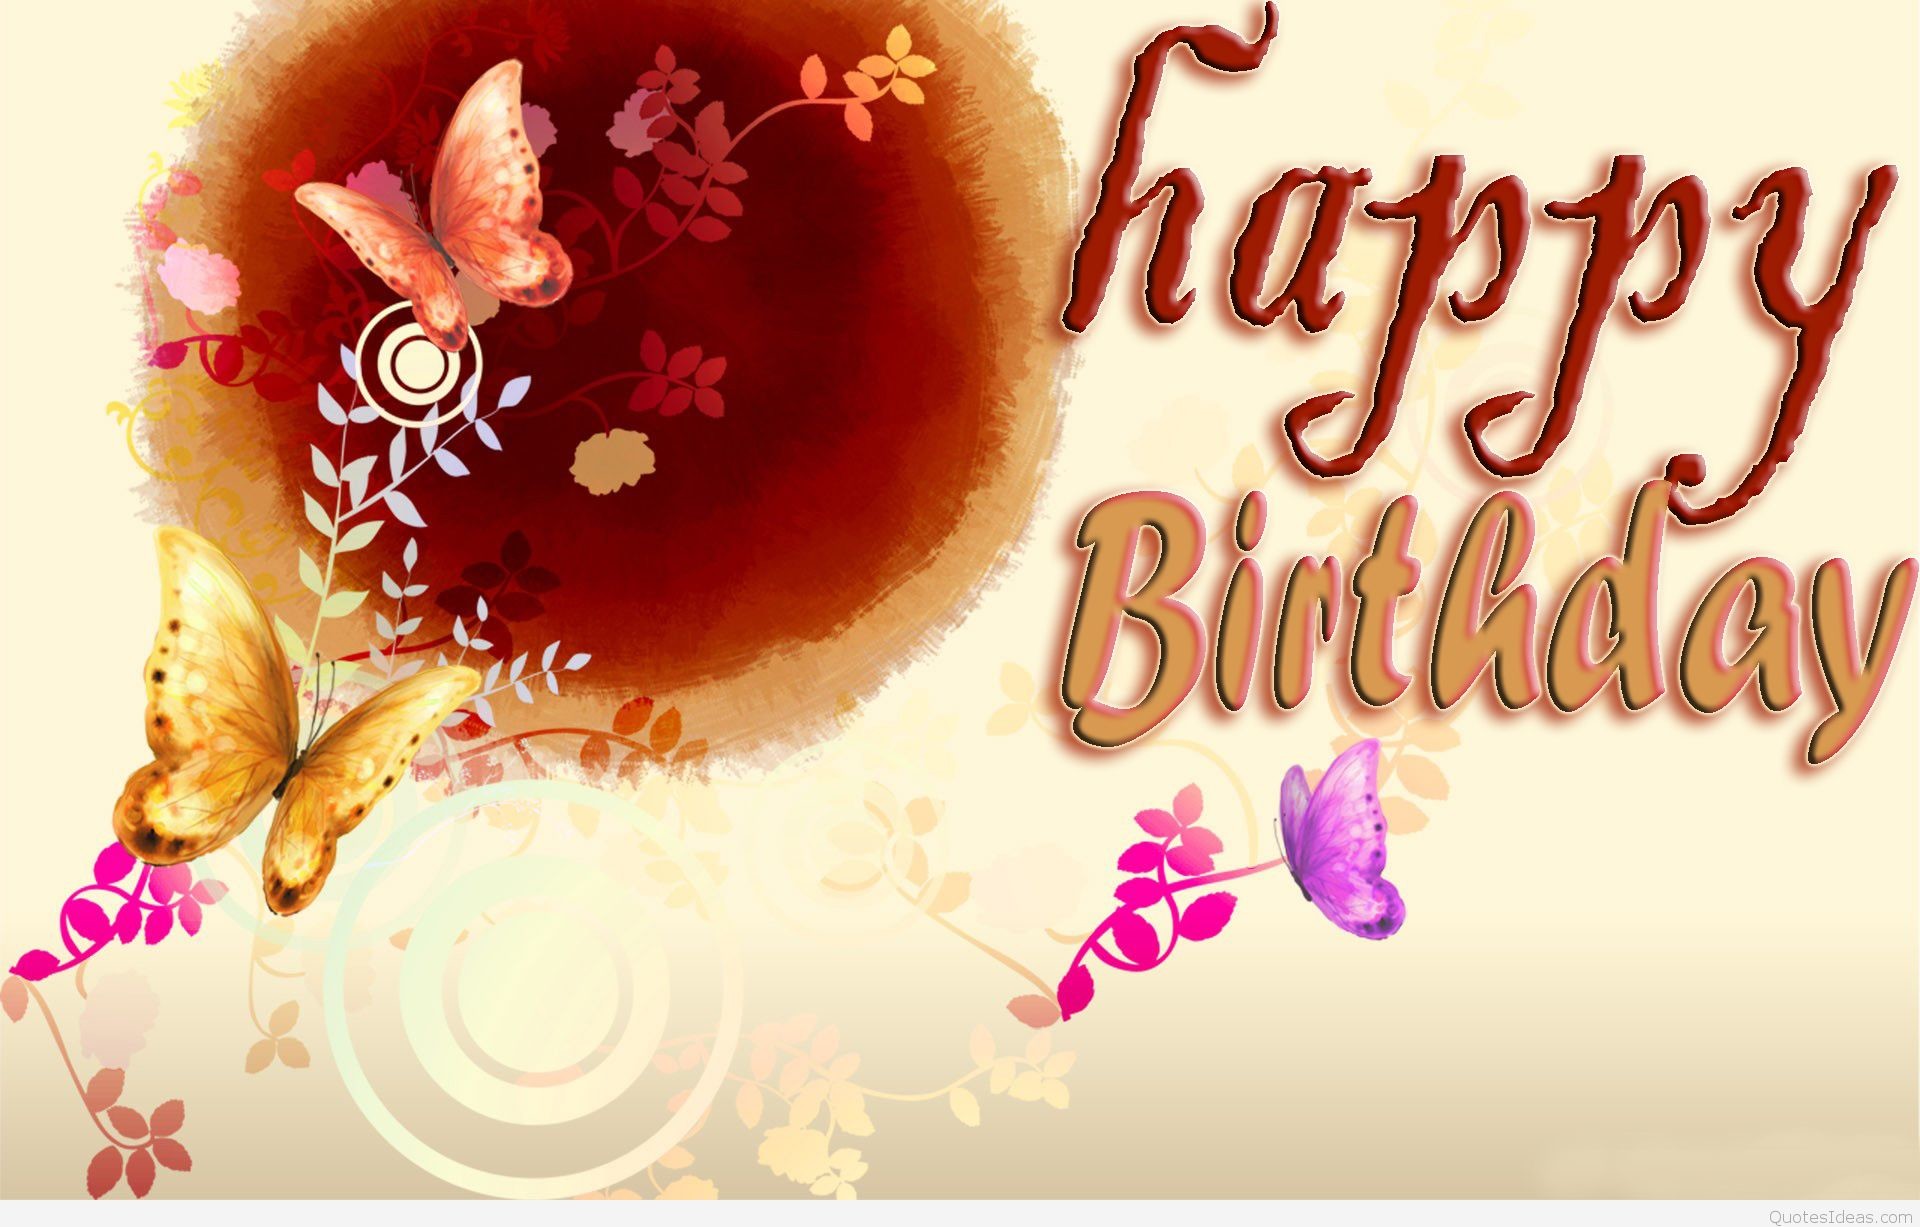 1920x1227 ... Birthday-Messages-Quotes-Wallpaper-16-For-Desktop-Background ...